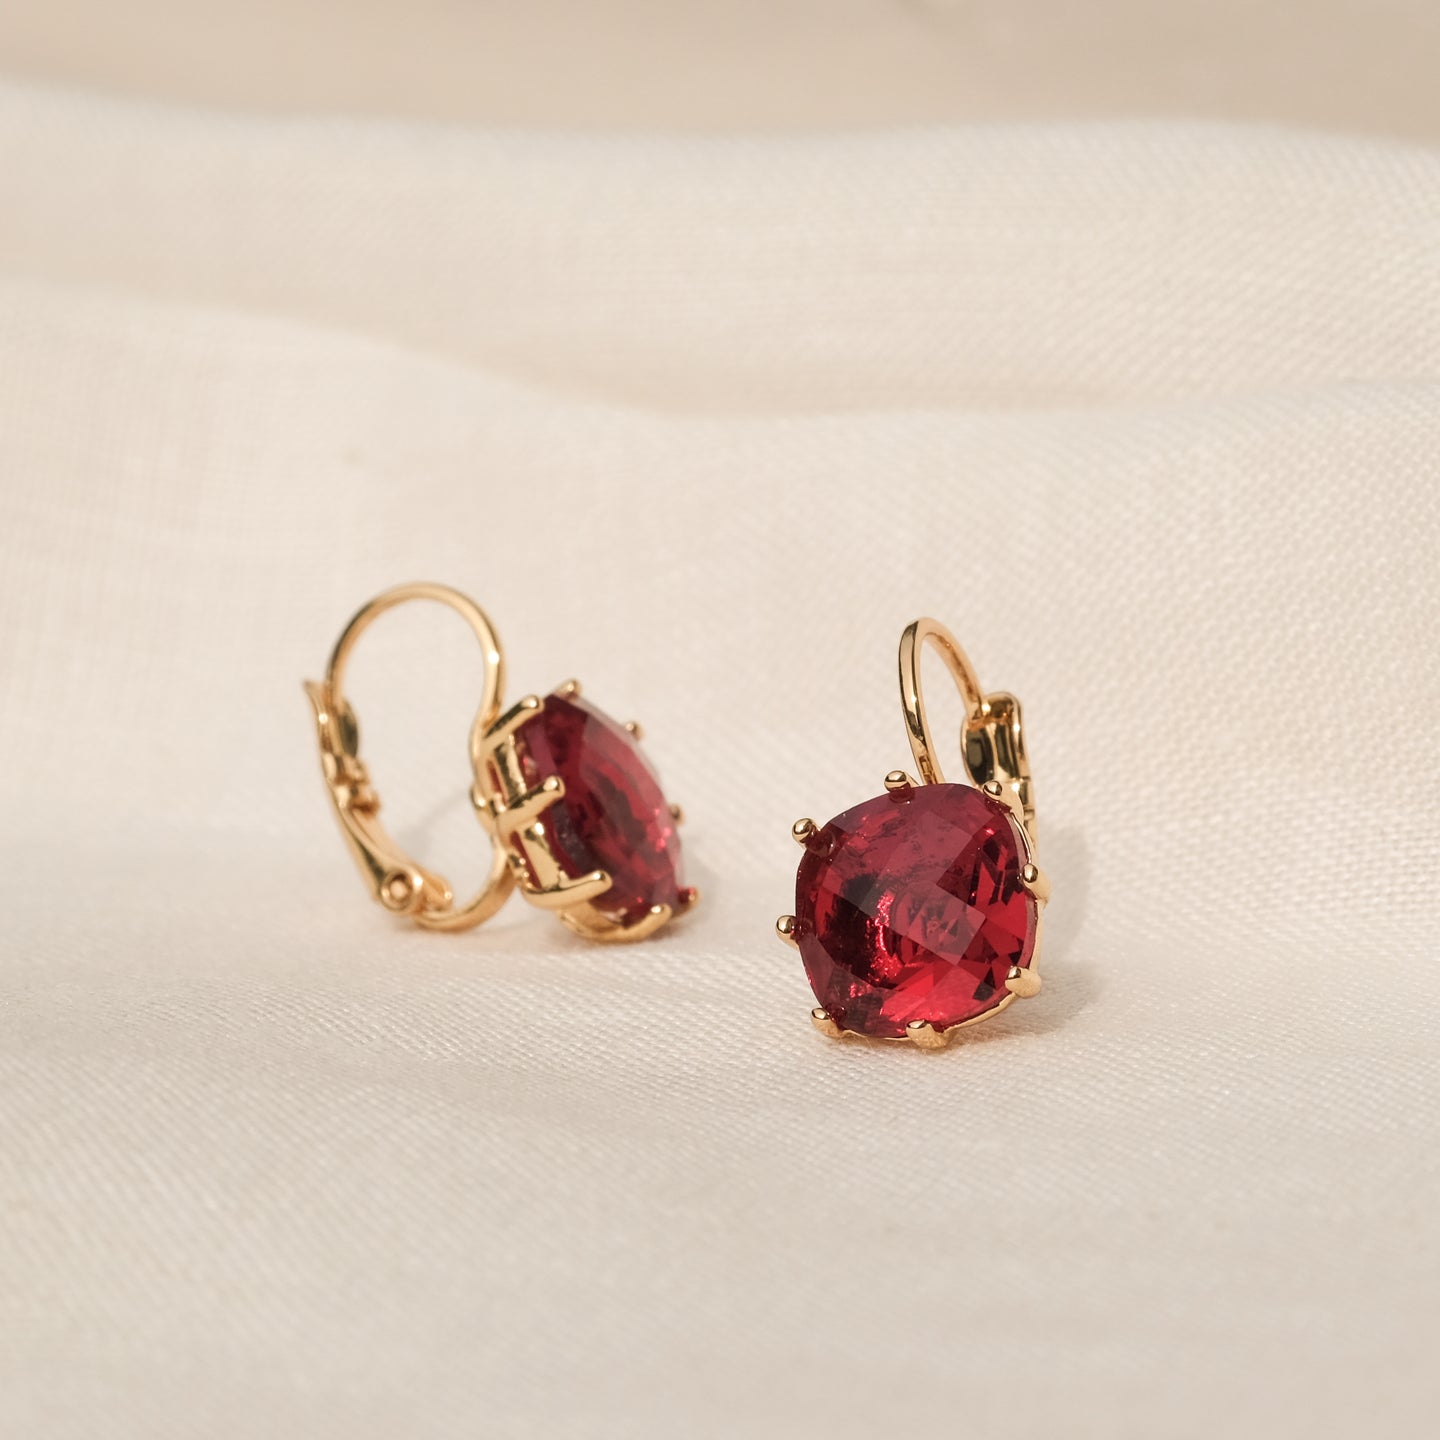 products/eula-cz-earrings-18k-gold-plated-brass-scarlet-stone-1.jpg